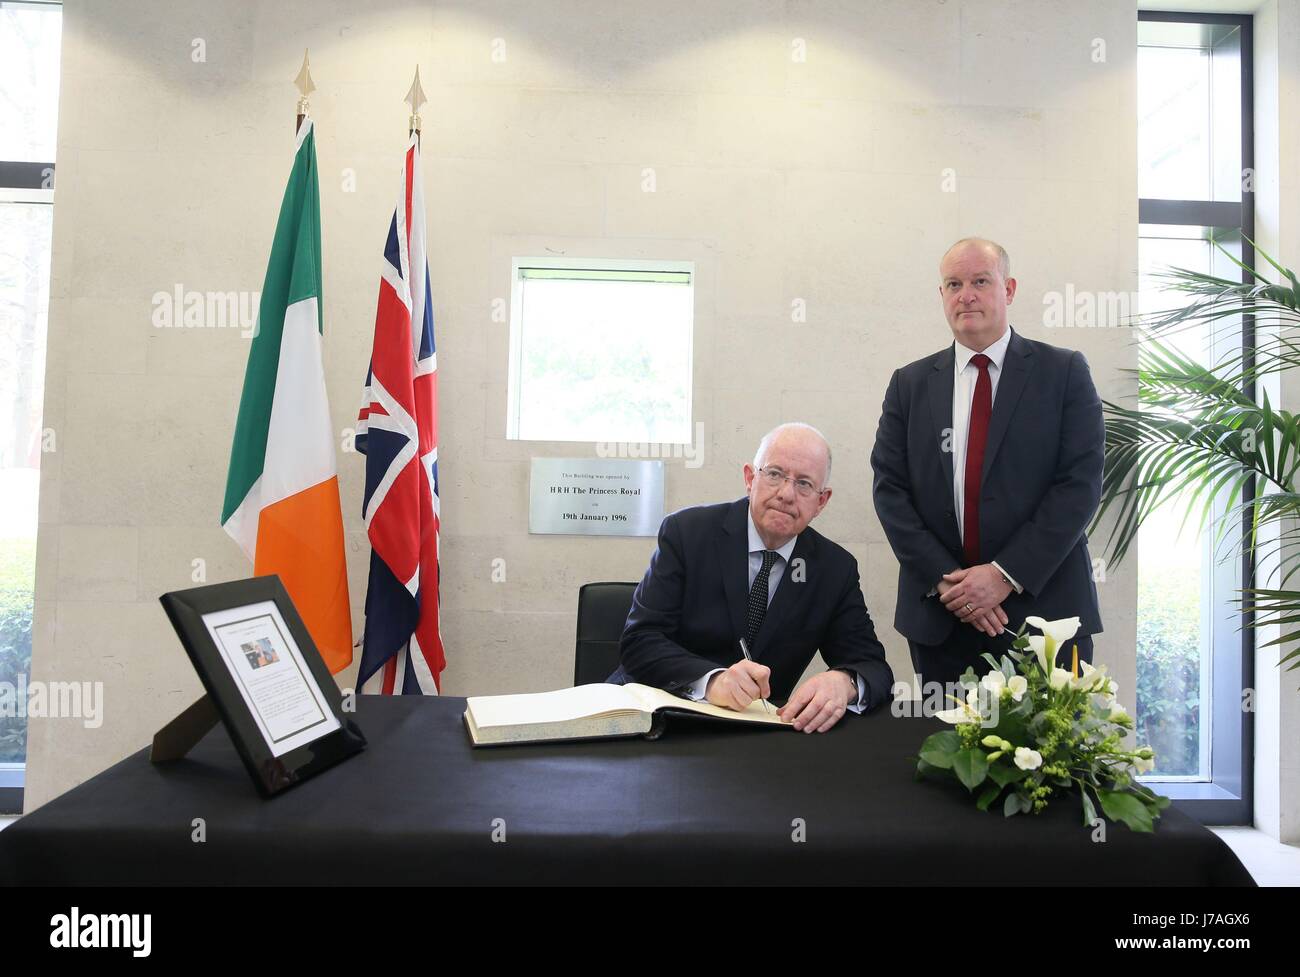 Minister for Foreign Affairs Charlie Flanagan, with Deputy Head of Mission Neil Holland (right), signs a book of condolence at the British Embassy in Dublin for those affected by the attack in Manchester. Stock Photo